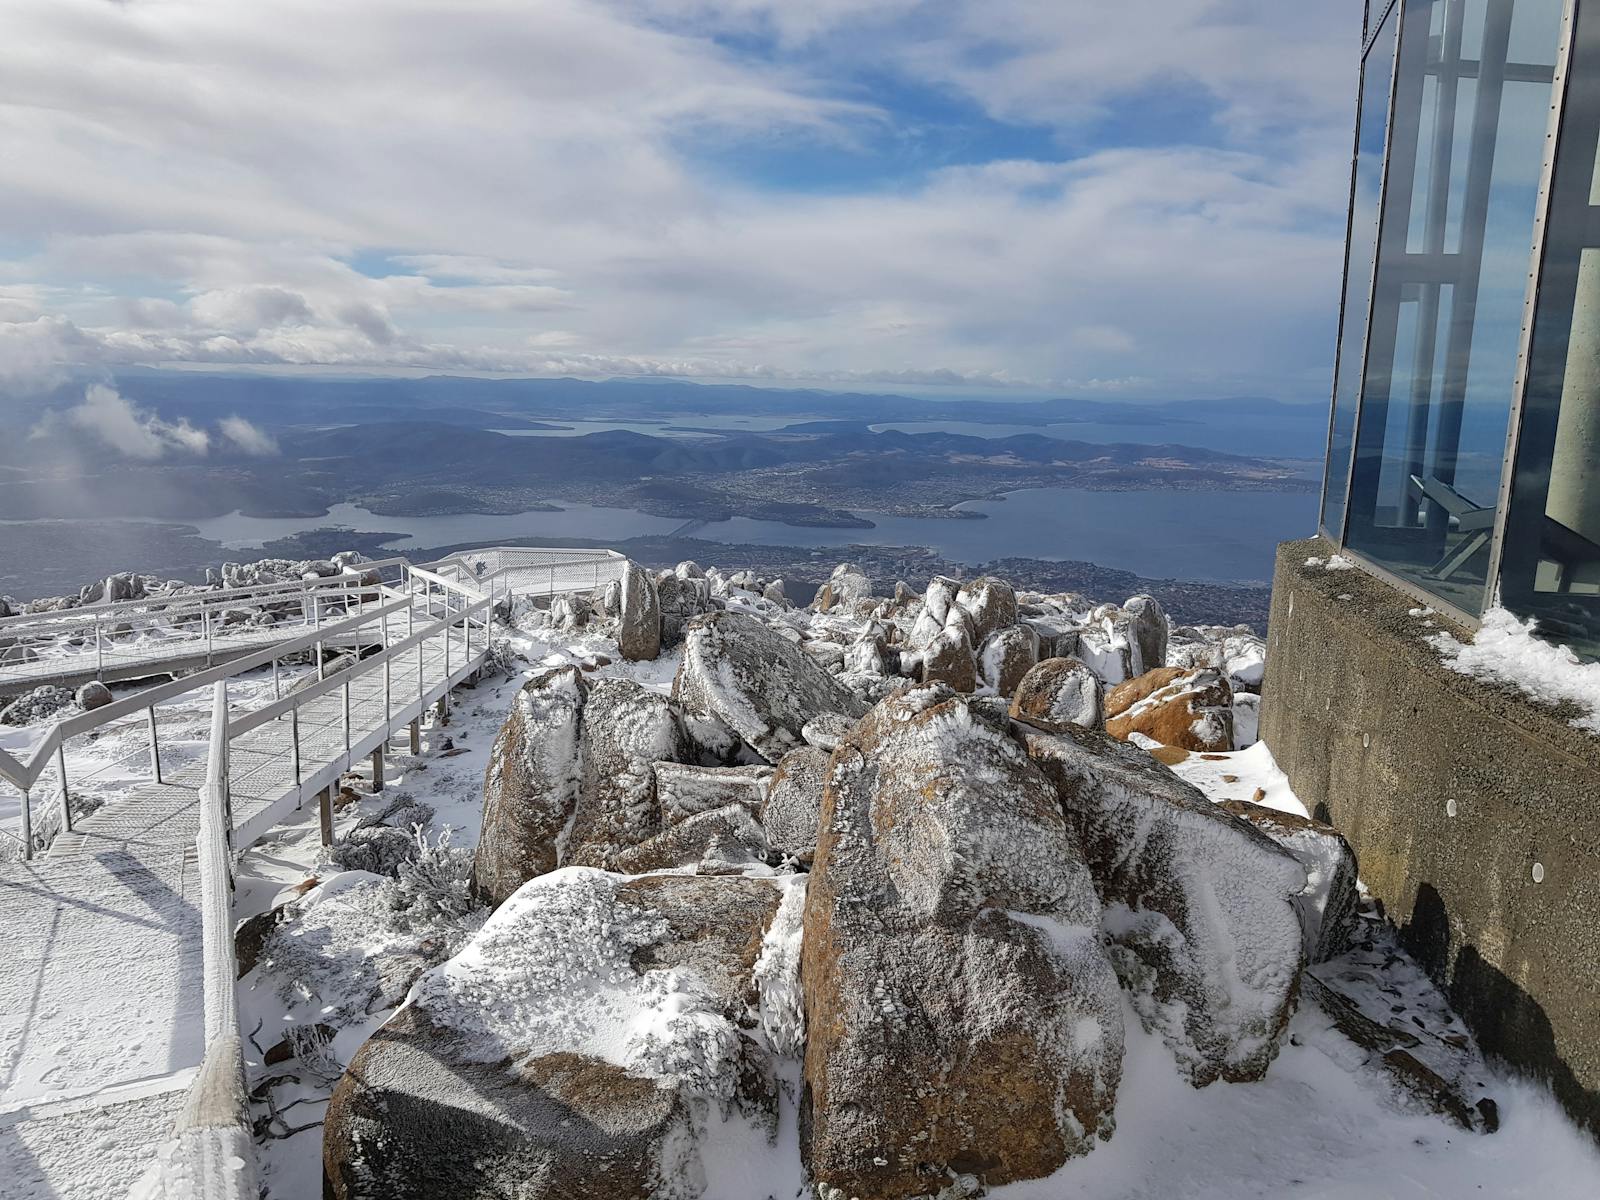 Lookout and observation areas covered in snow.